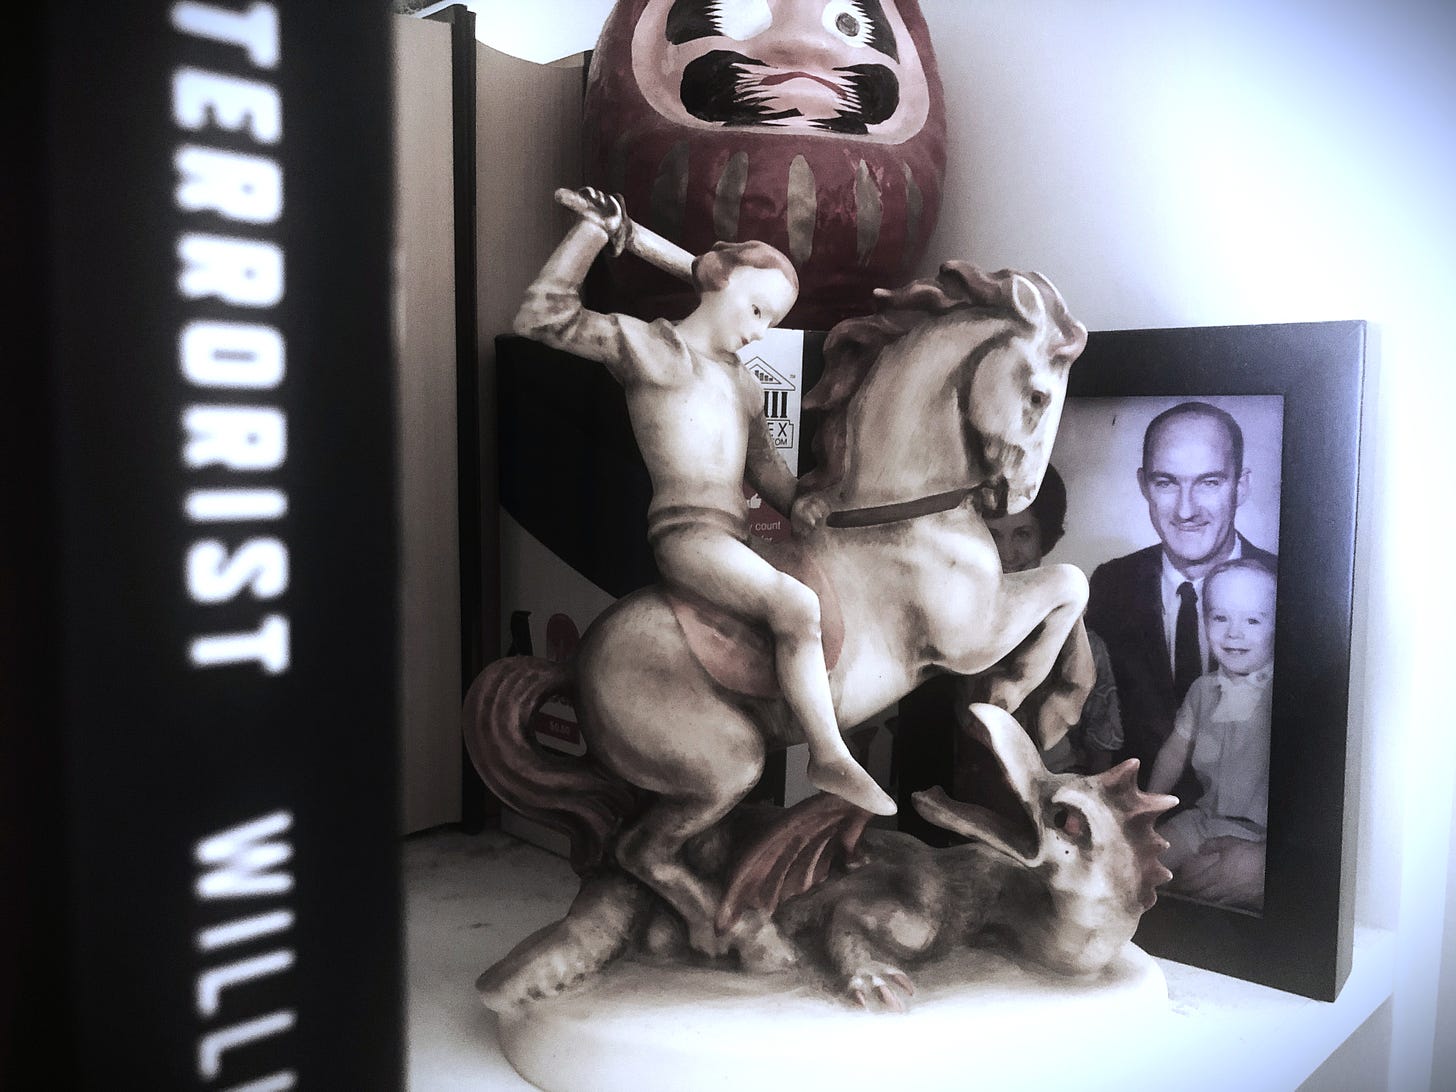 A Hummel figure of St. George on horseback fighting a dragon sits on a shelf, partially obscuring an old family photograph showing a father and son. A Japanese daruma doll sits above and behind with one eye filled in. In the foreground is the blurry spine of a book, with only the words "Terrorist Will" visible.